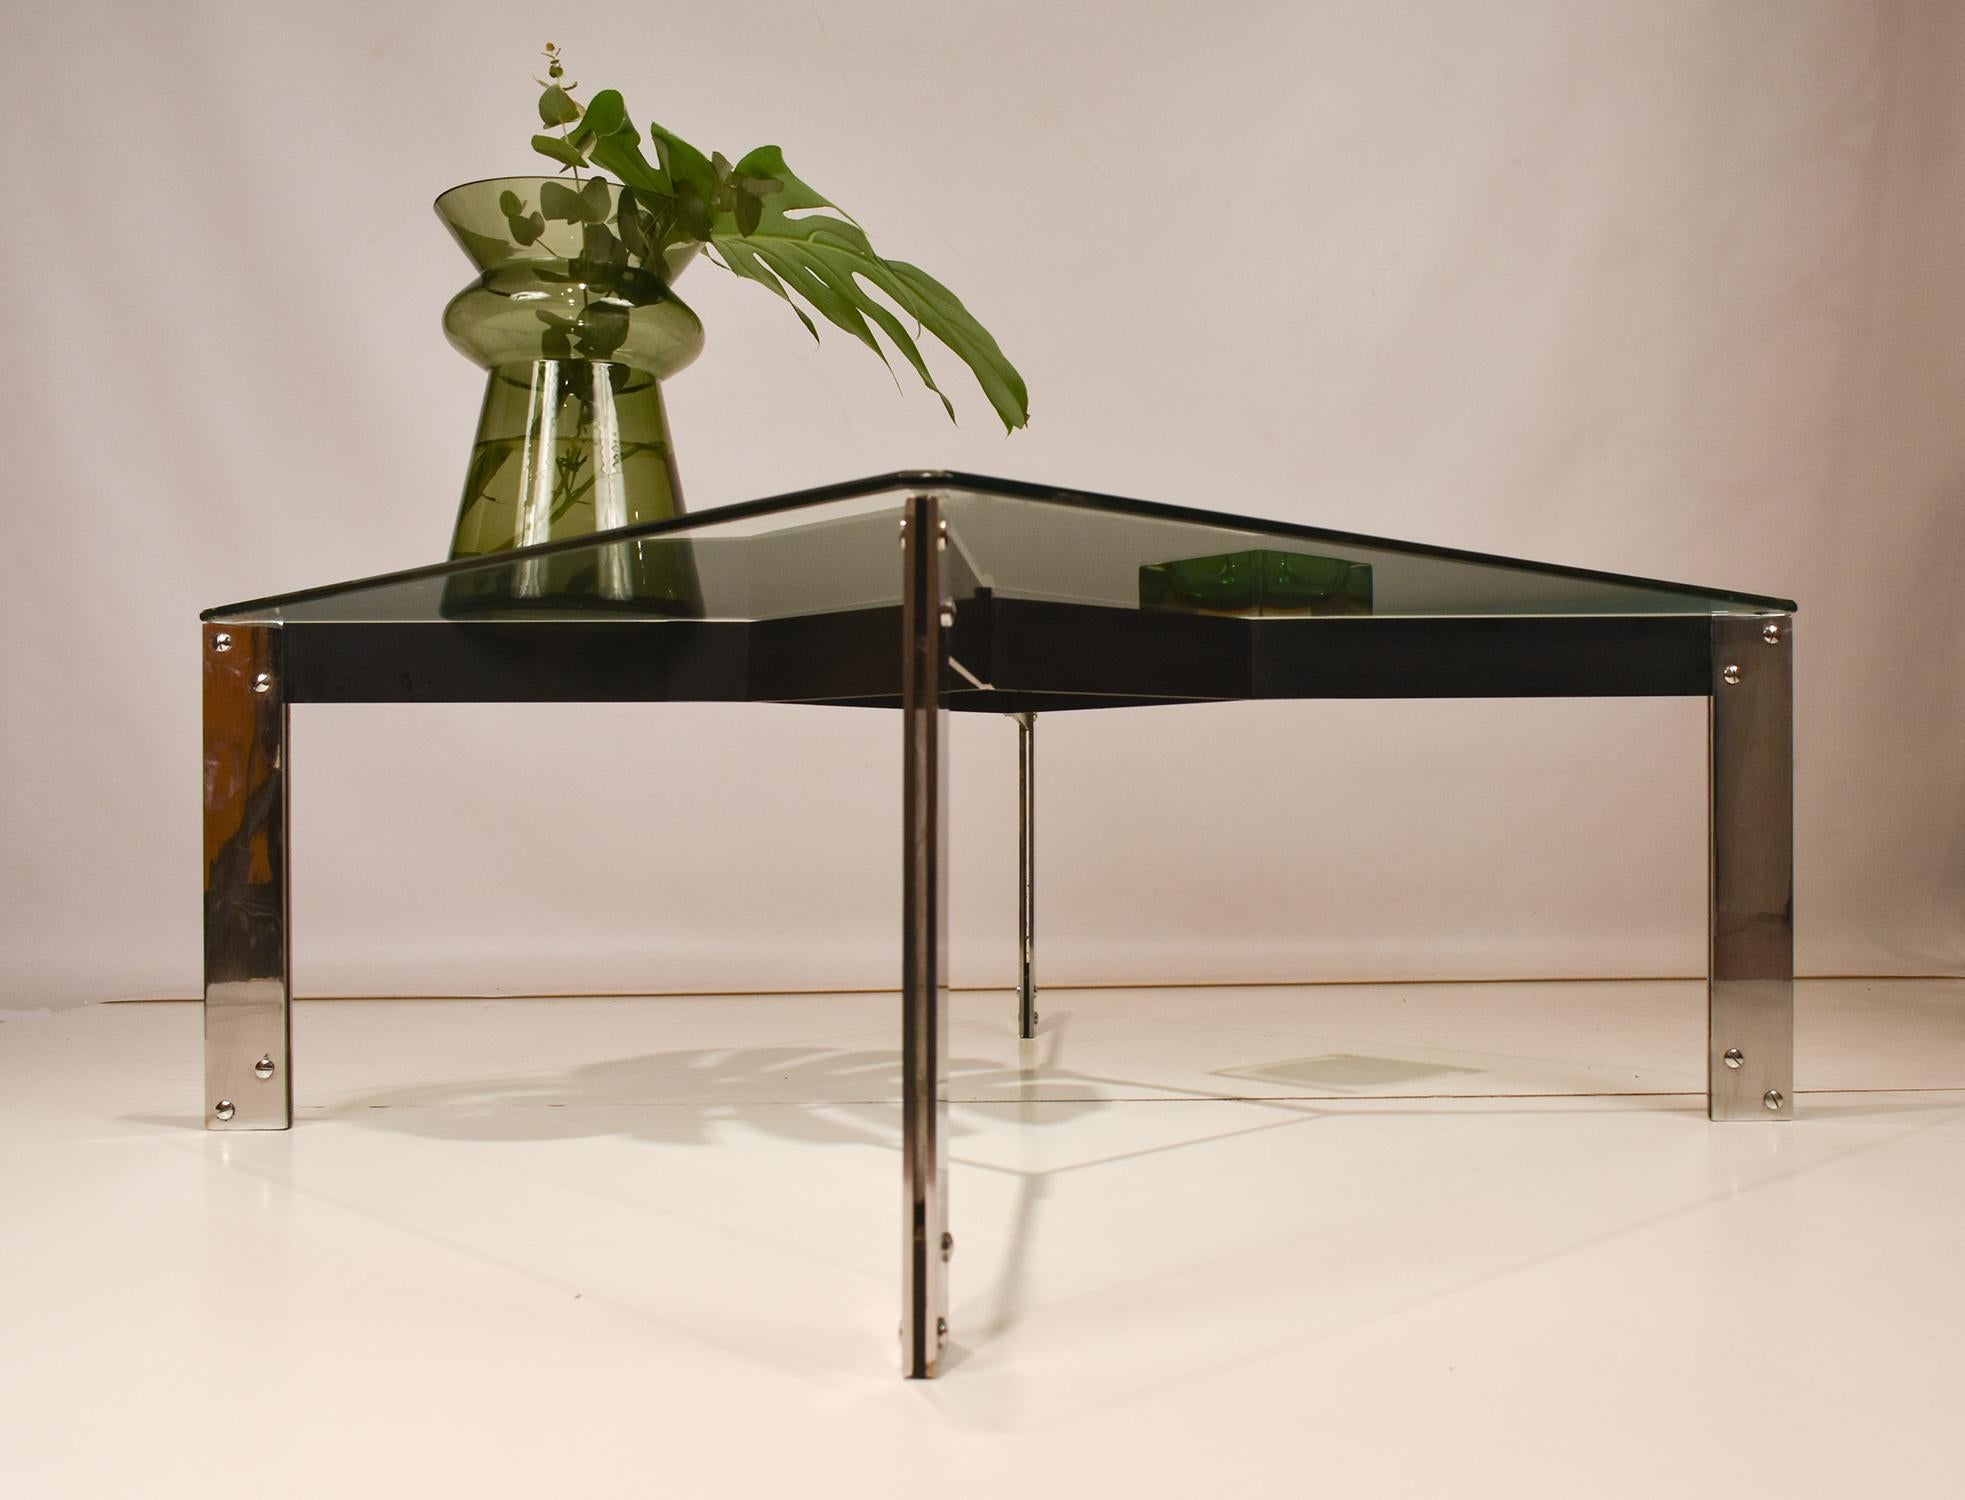 Spanish Glass and Iron Coffee Table, Miguel Milá, Spain 1960's For Sale